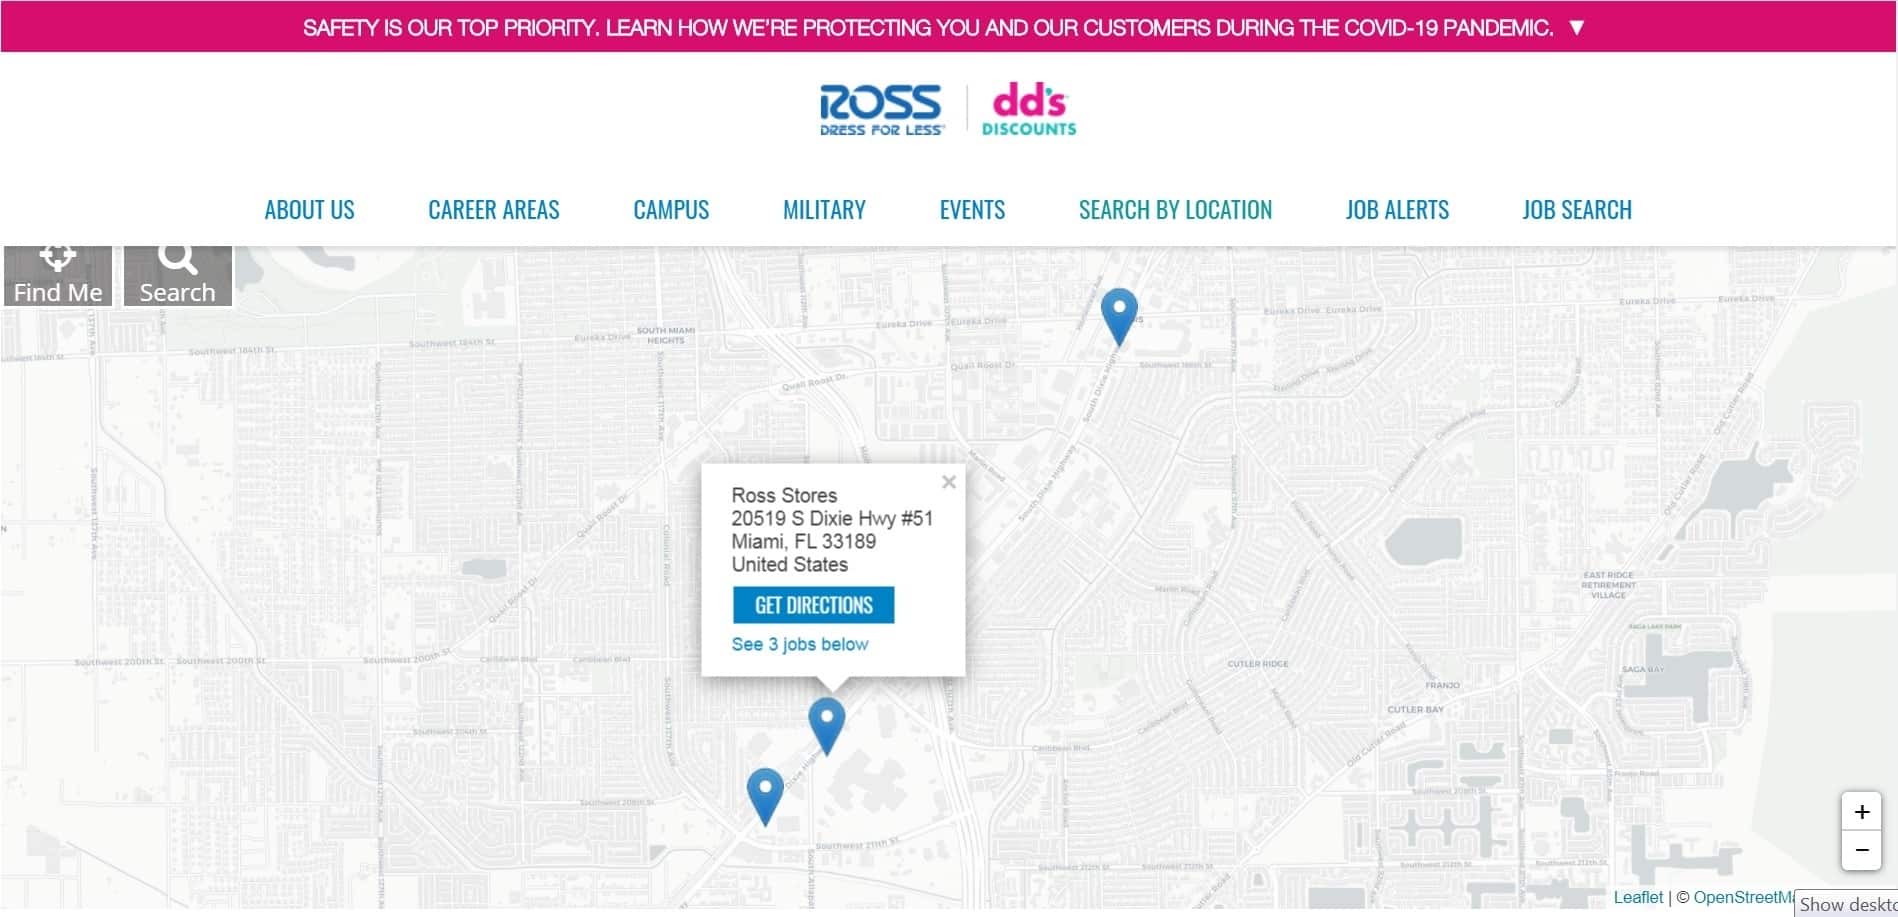 You can use the Ross "Search by Location" navigation link to make the application process much easier.